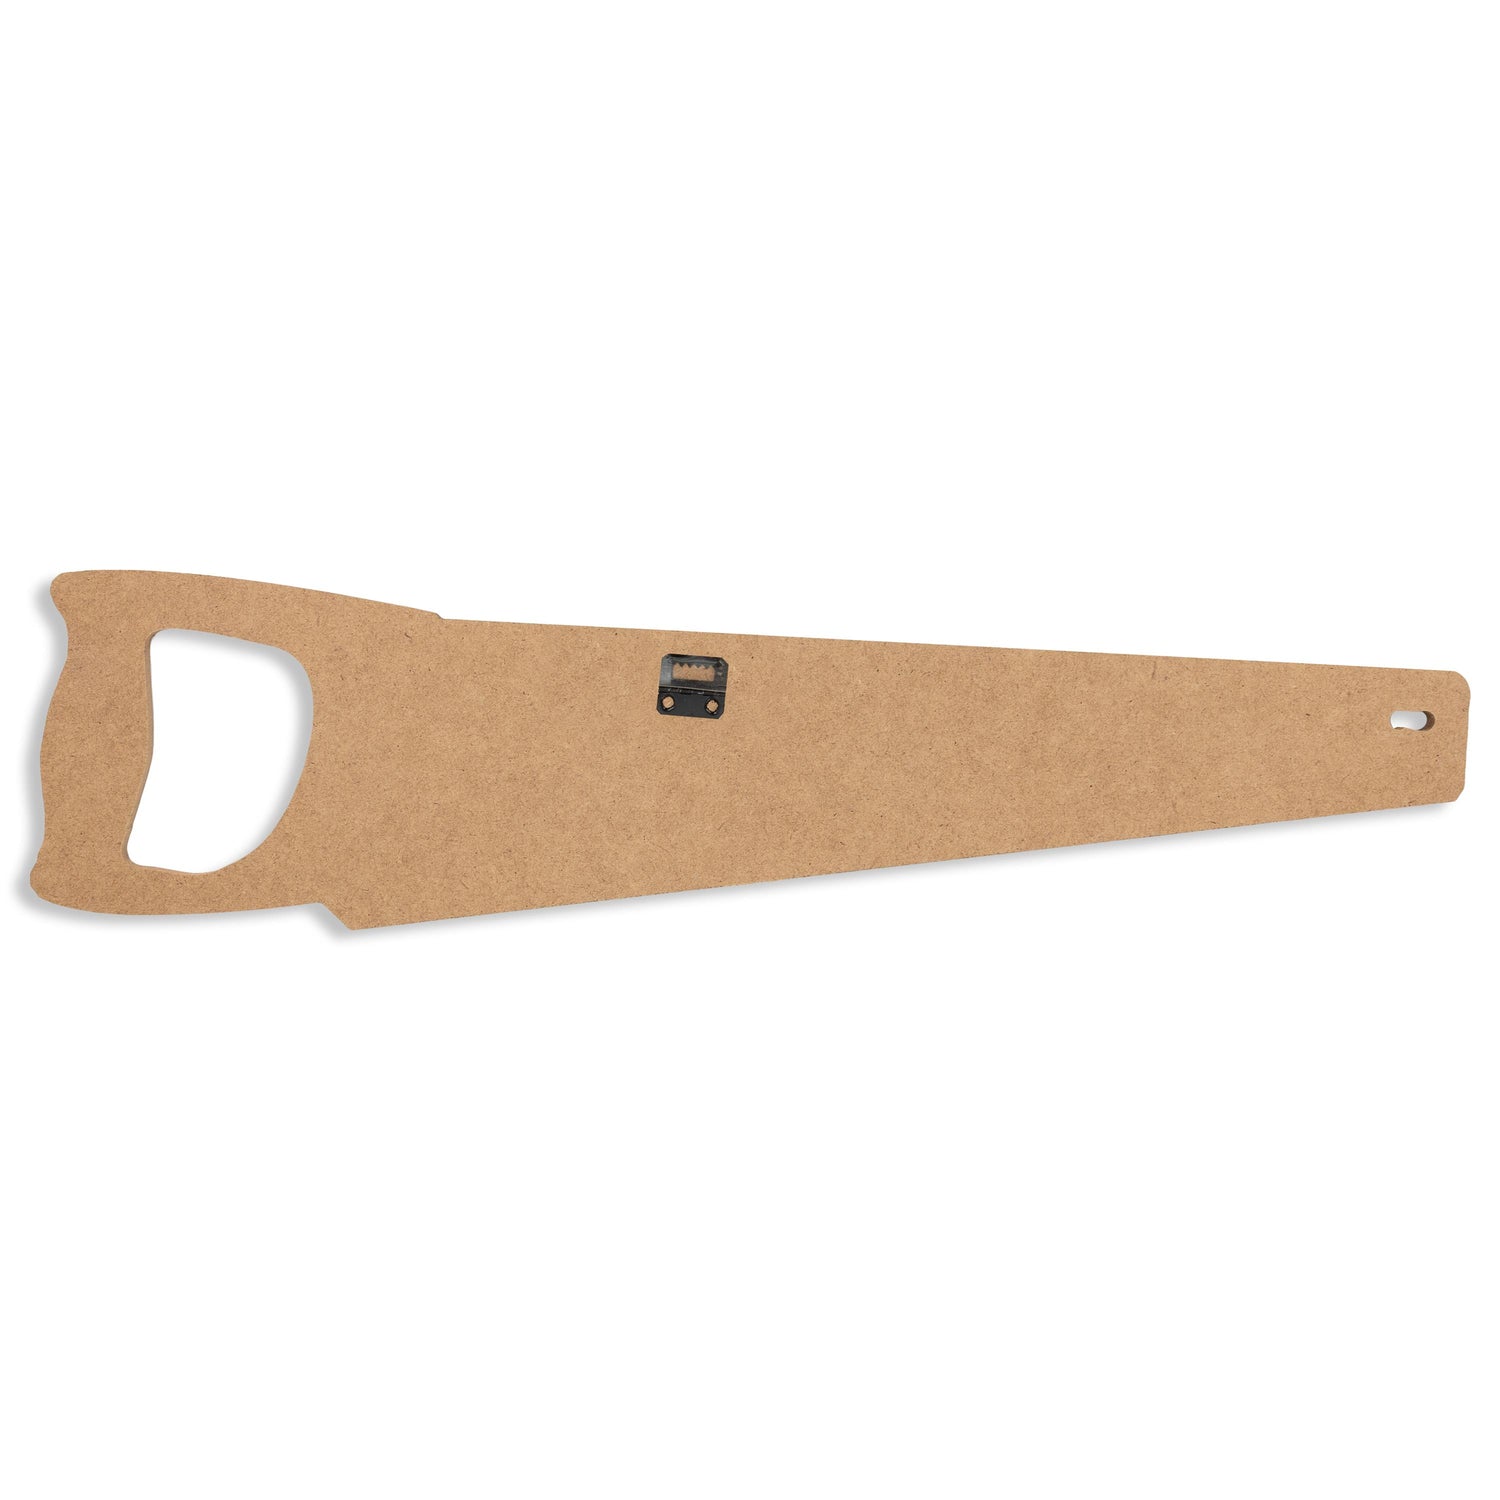 Texas A&M Wood Handsaw Sign